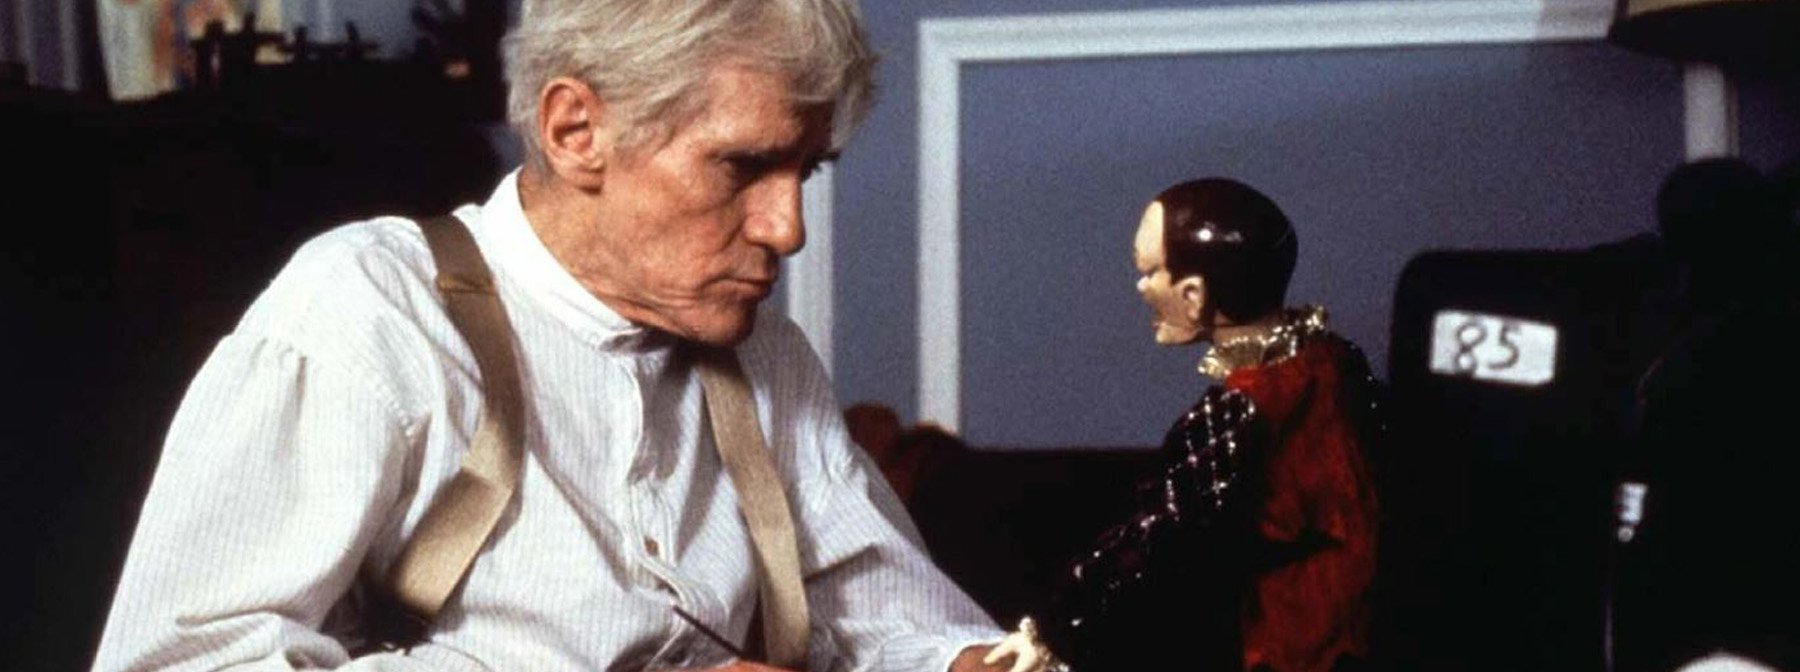 Andre Toulon (William Hickey) admires his puppet creation in Puppet Master (1989)